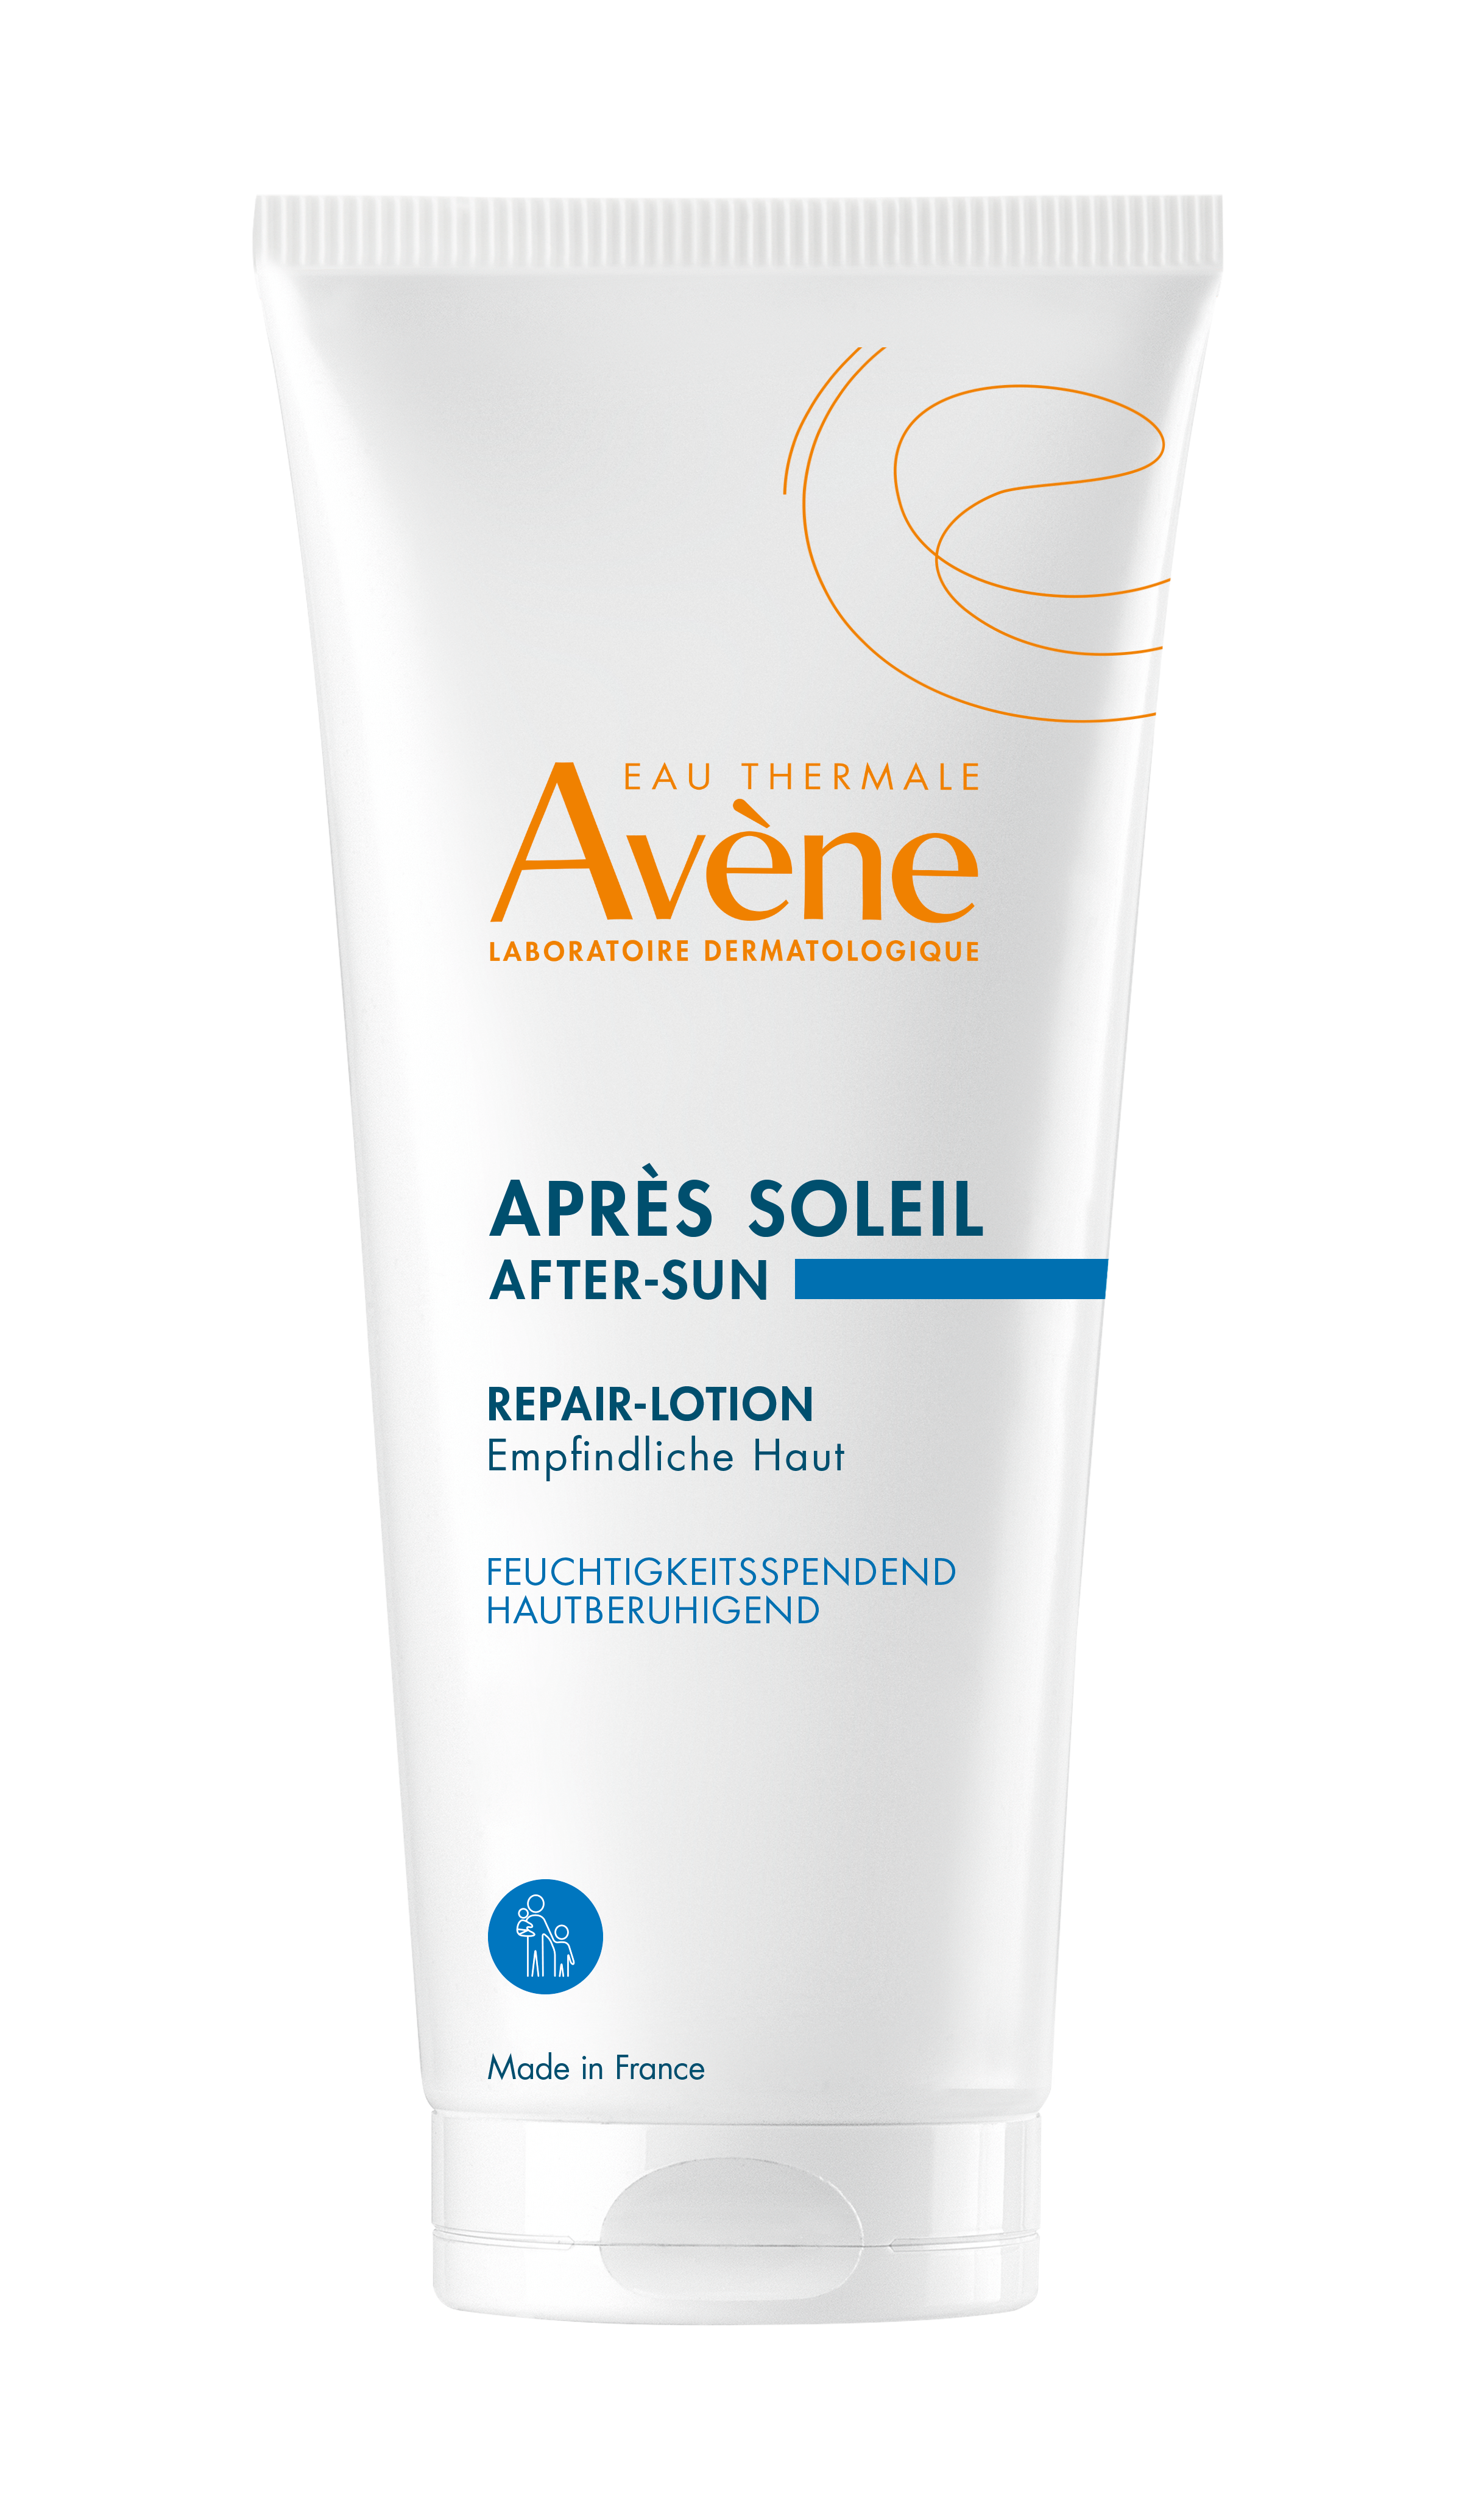 Eau Thermale Avène - After Sun Repairing Lotion 200ml